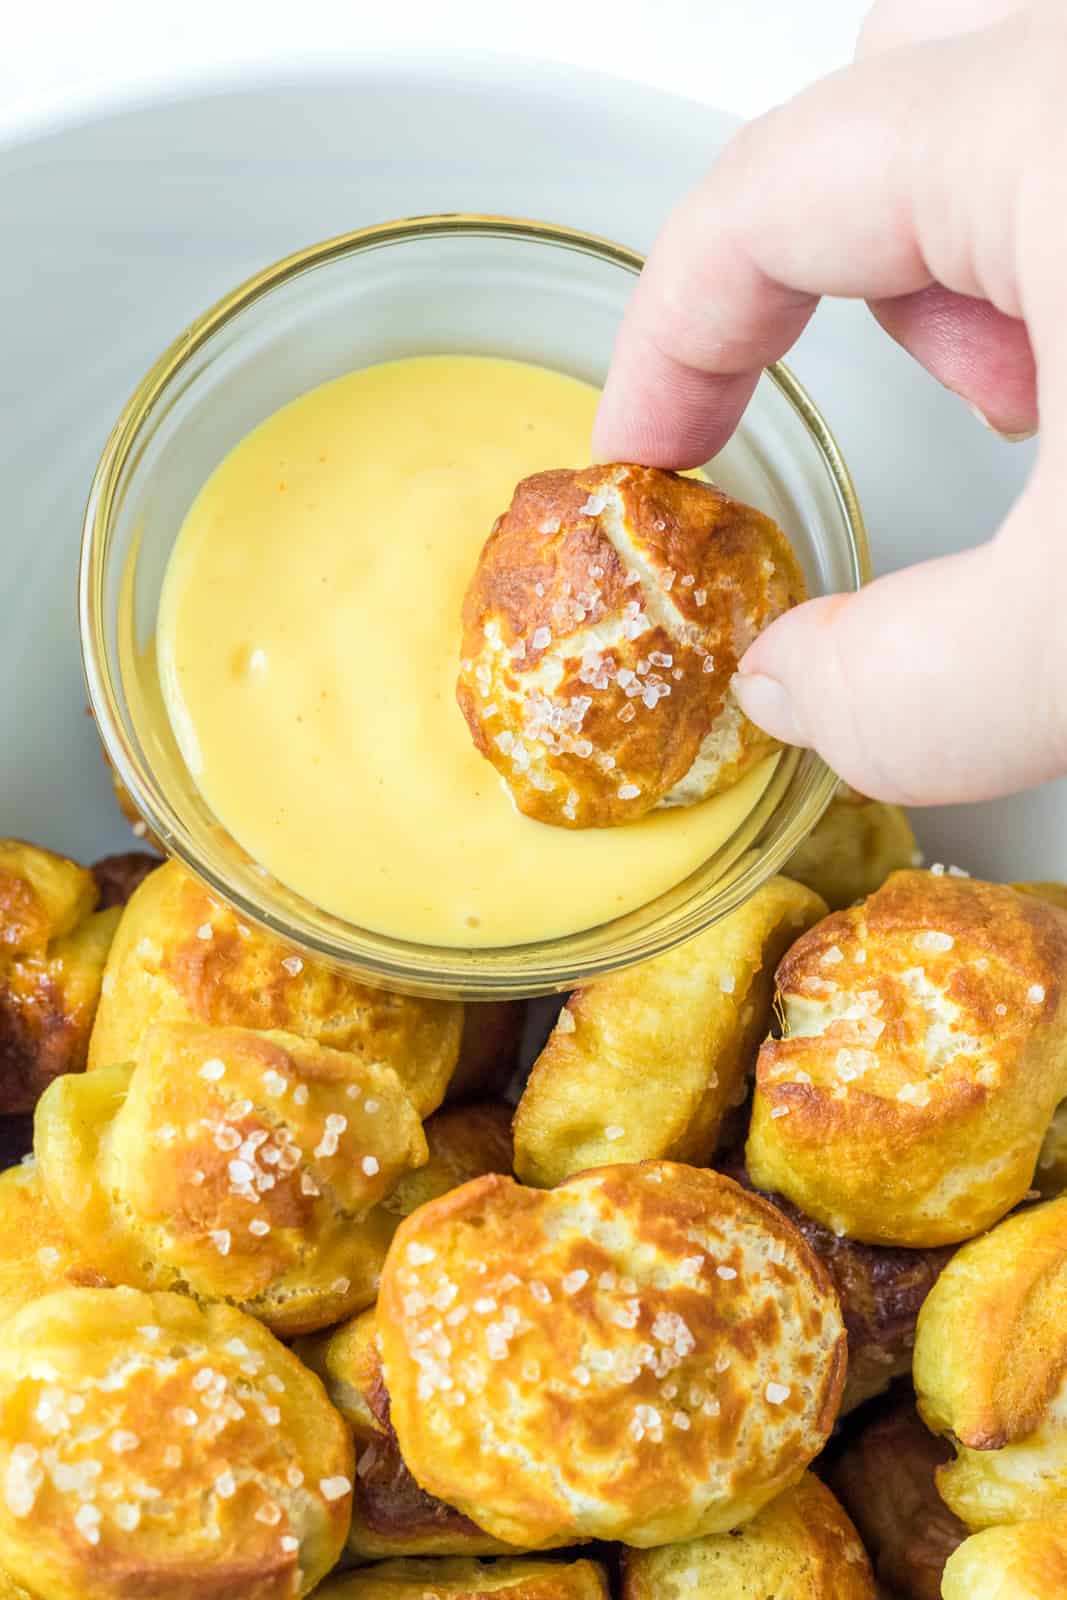 Hand dipping one pretzel bite into cheese sauce